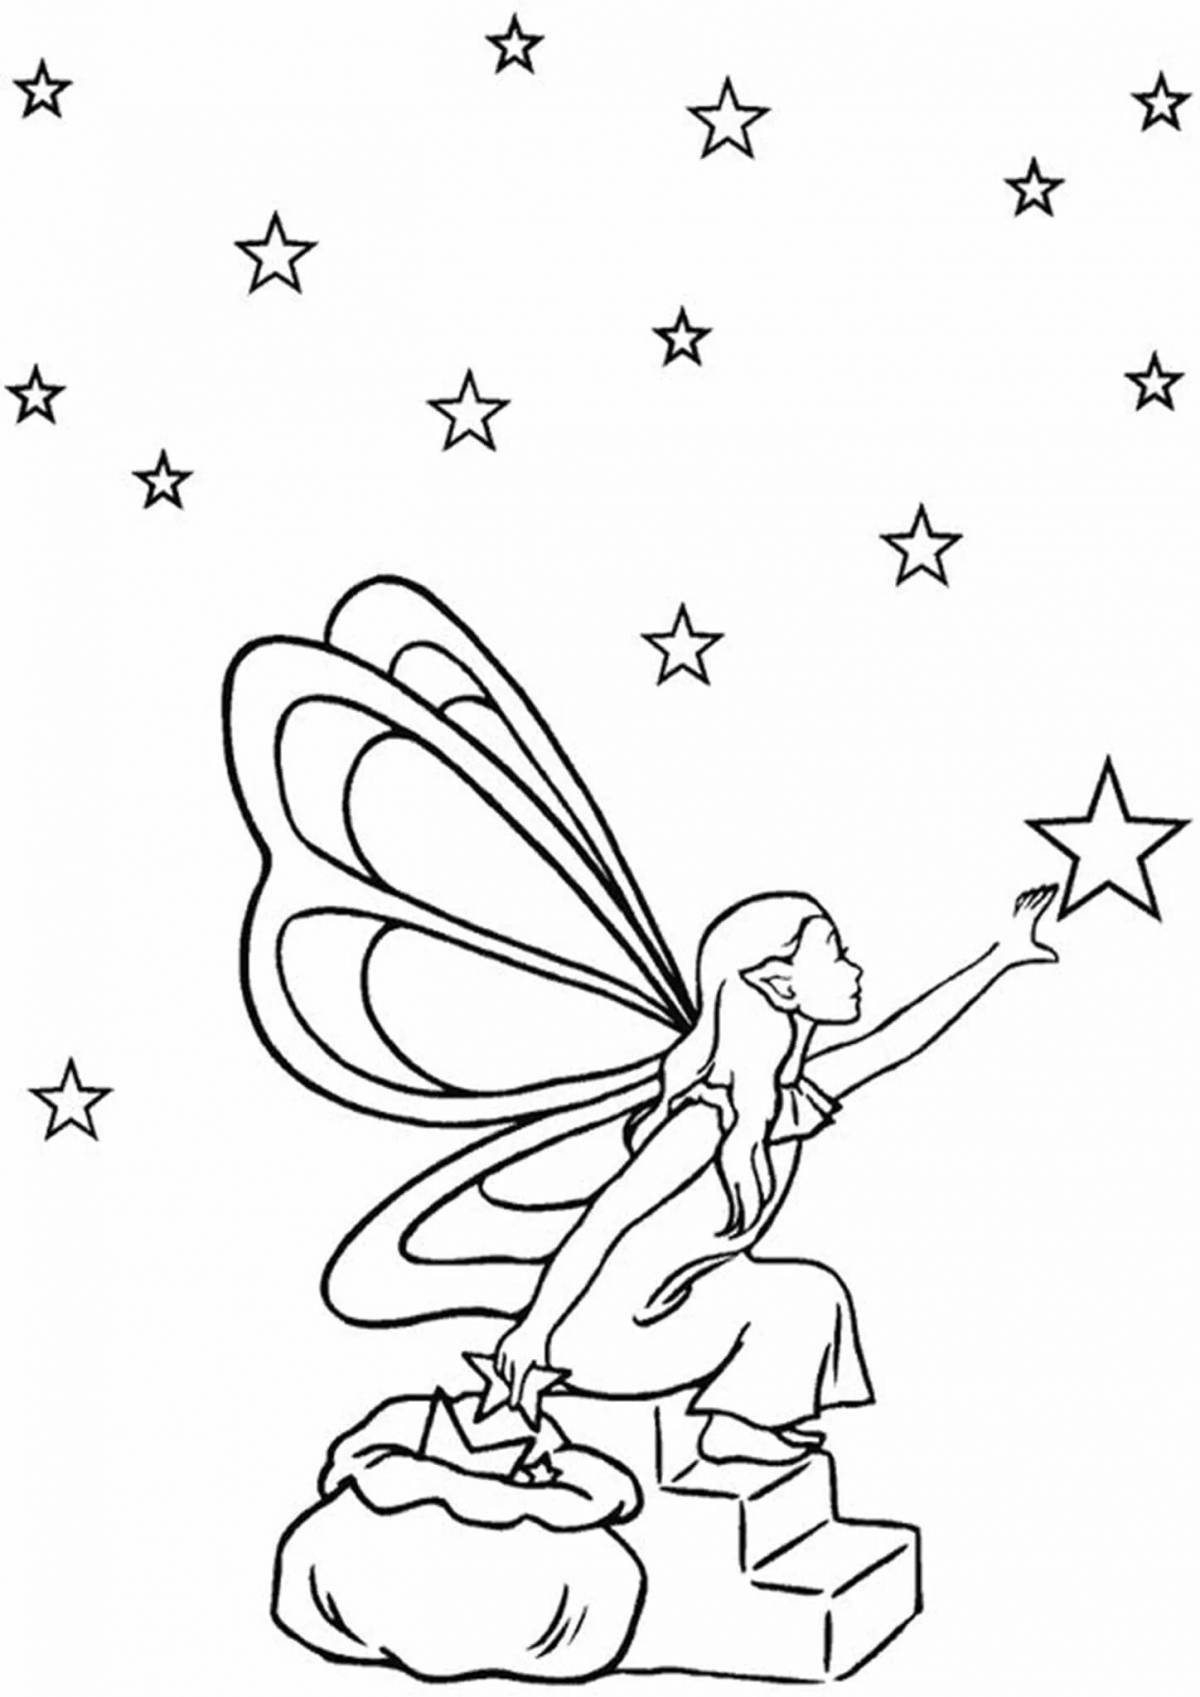 Amazing magic coloring book for kids